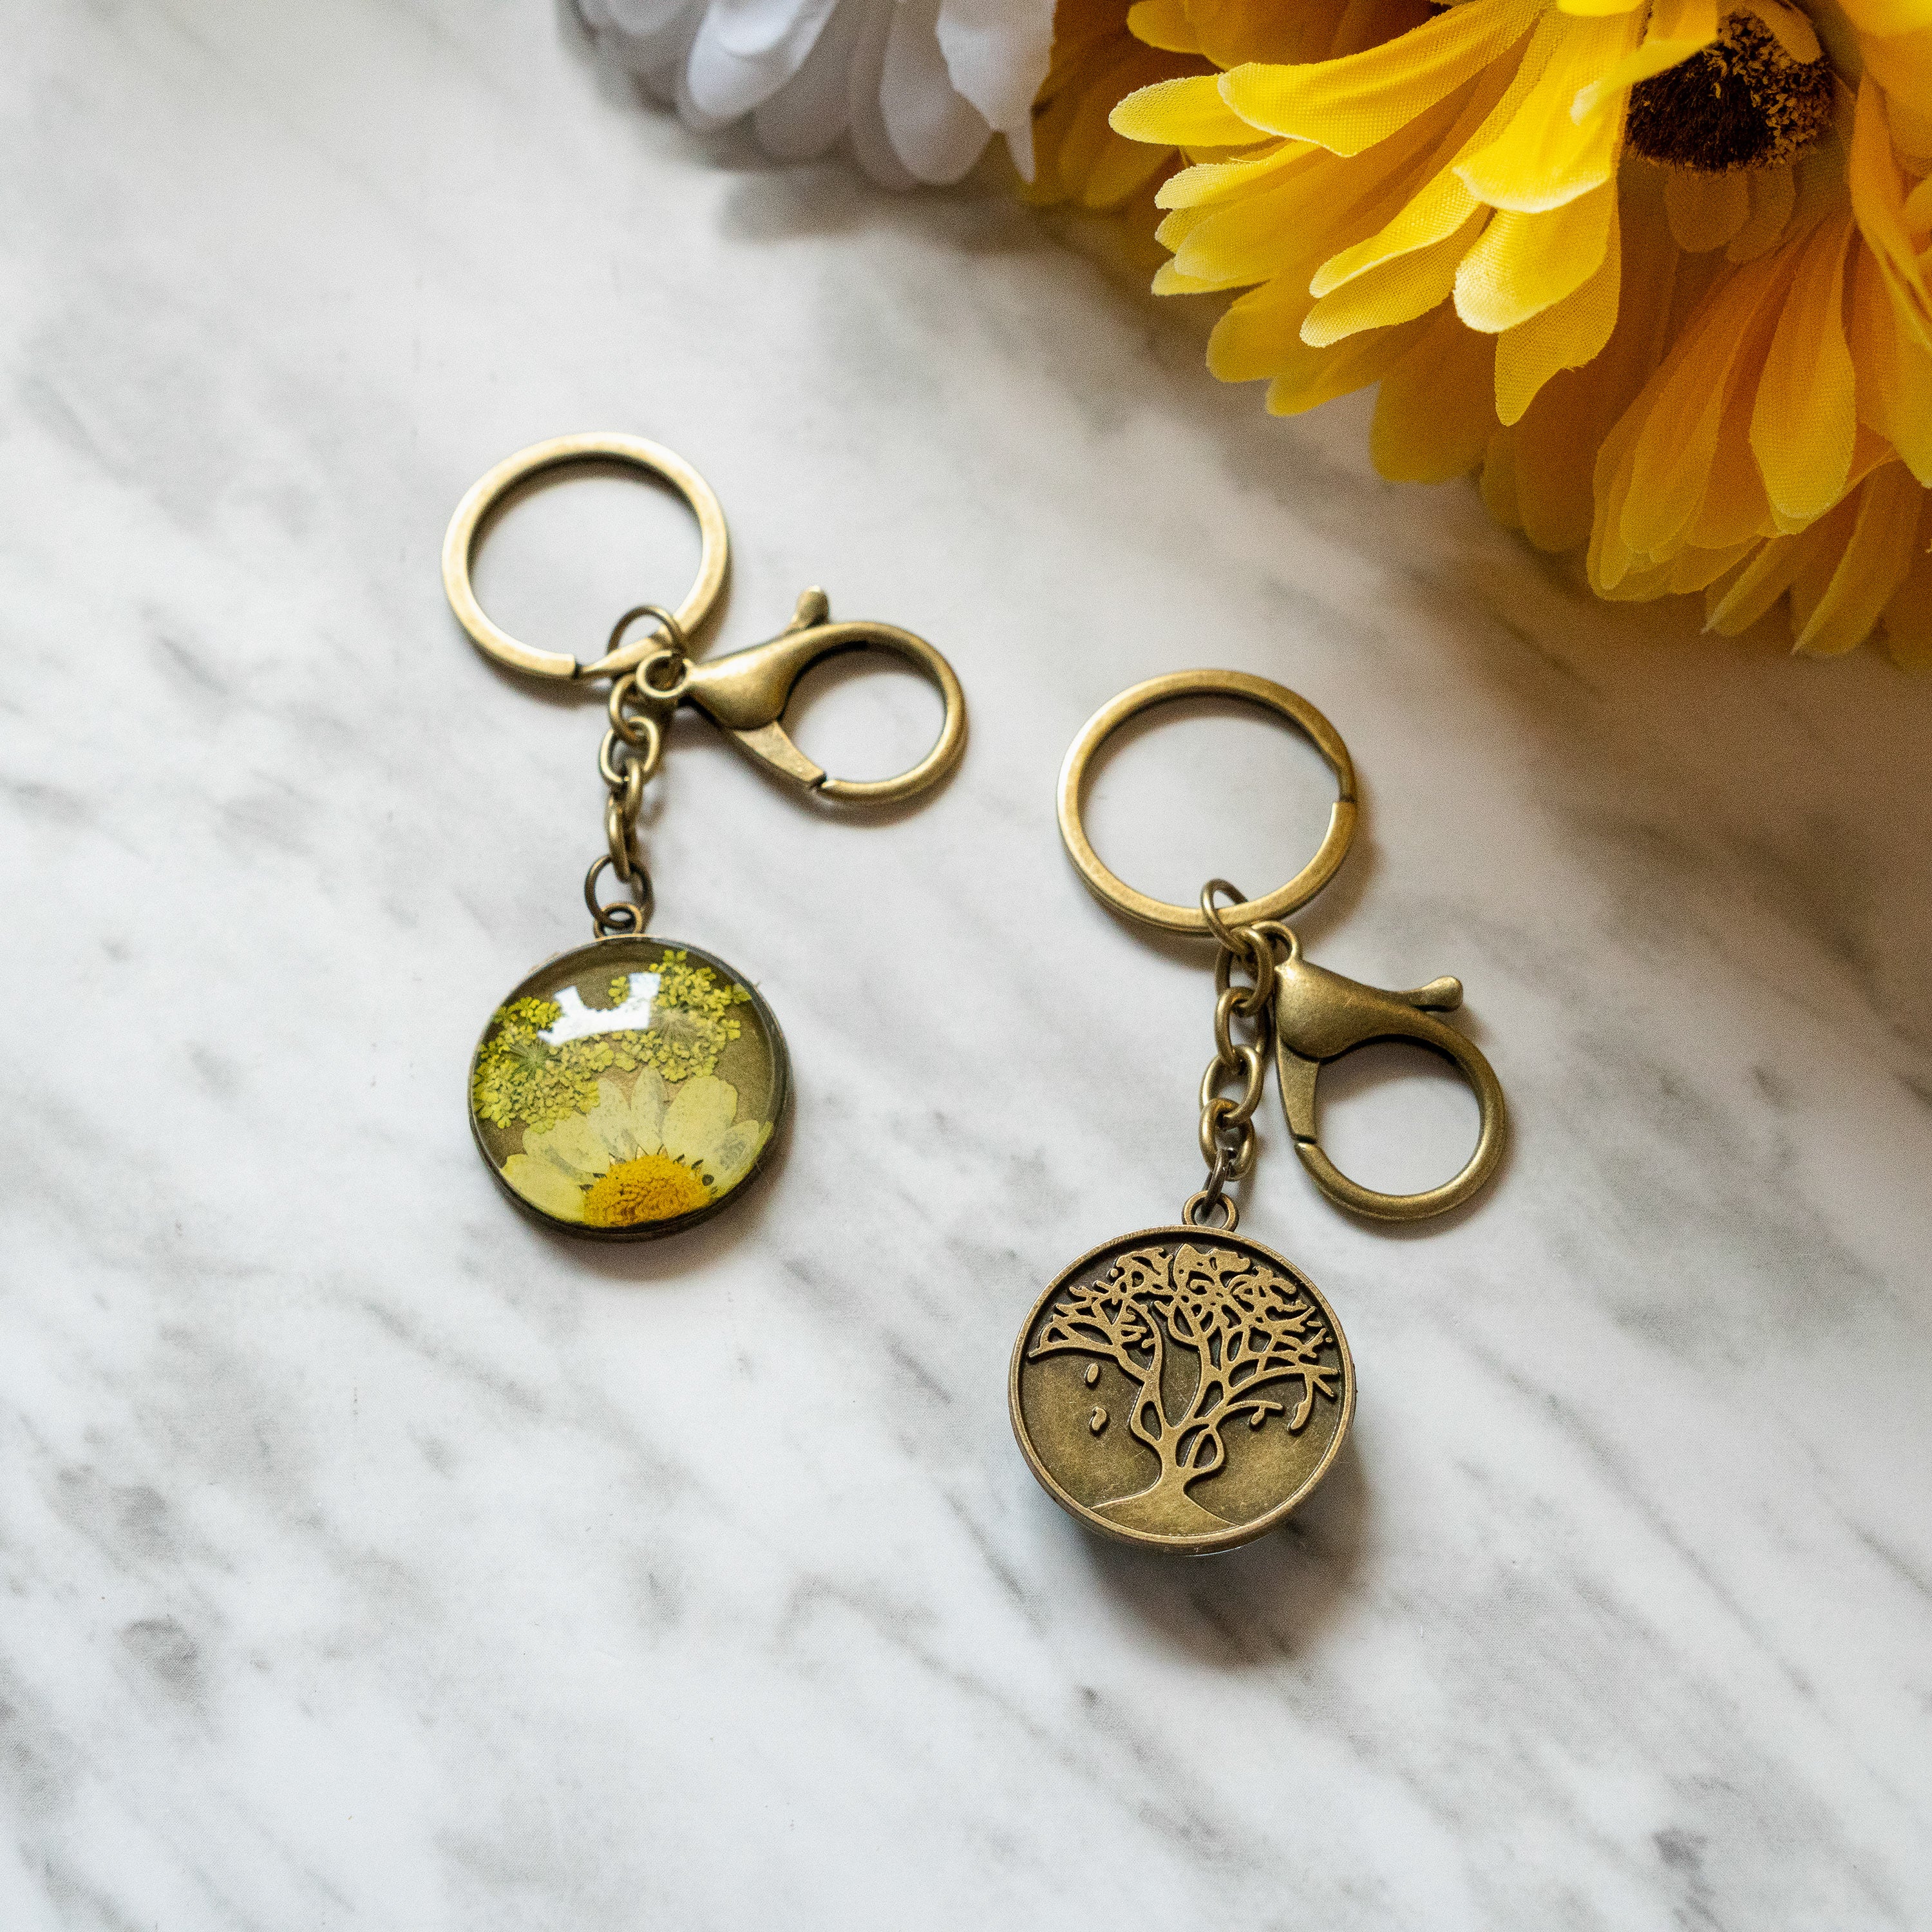 Real Pressed Flower Resin Keychain with Daisy and Lace Floral Neverland Floralfy 03